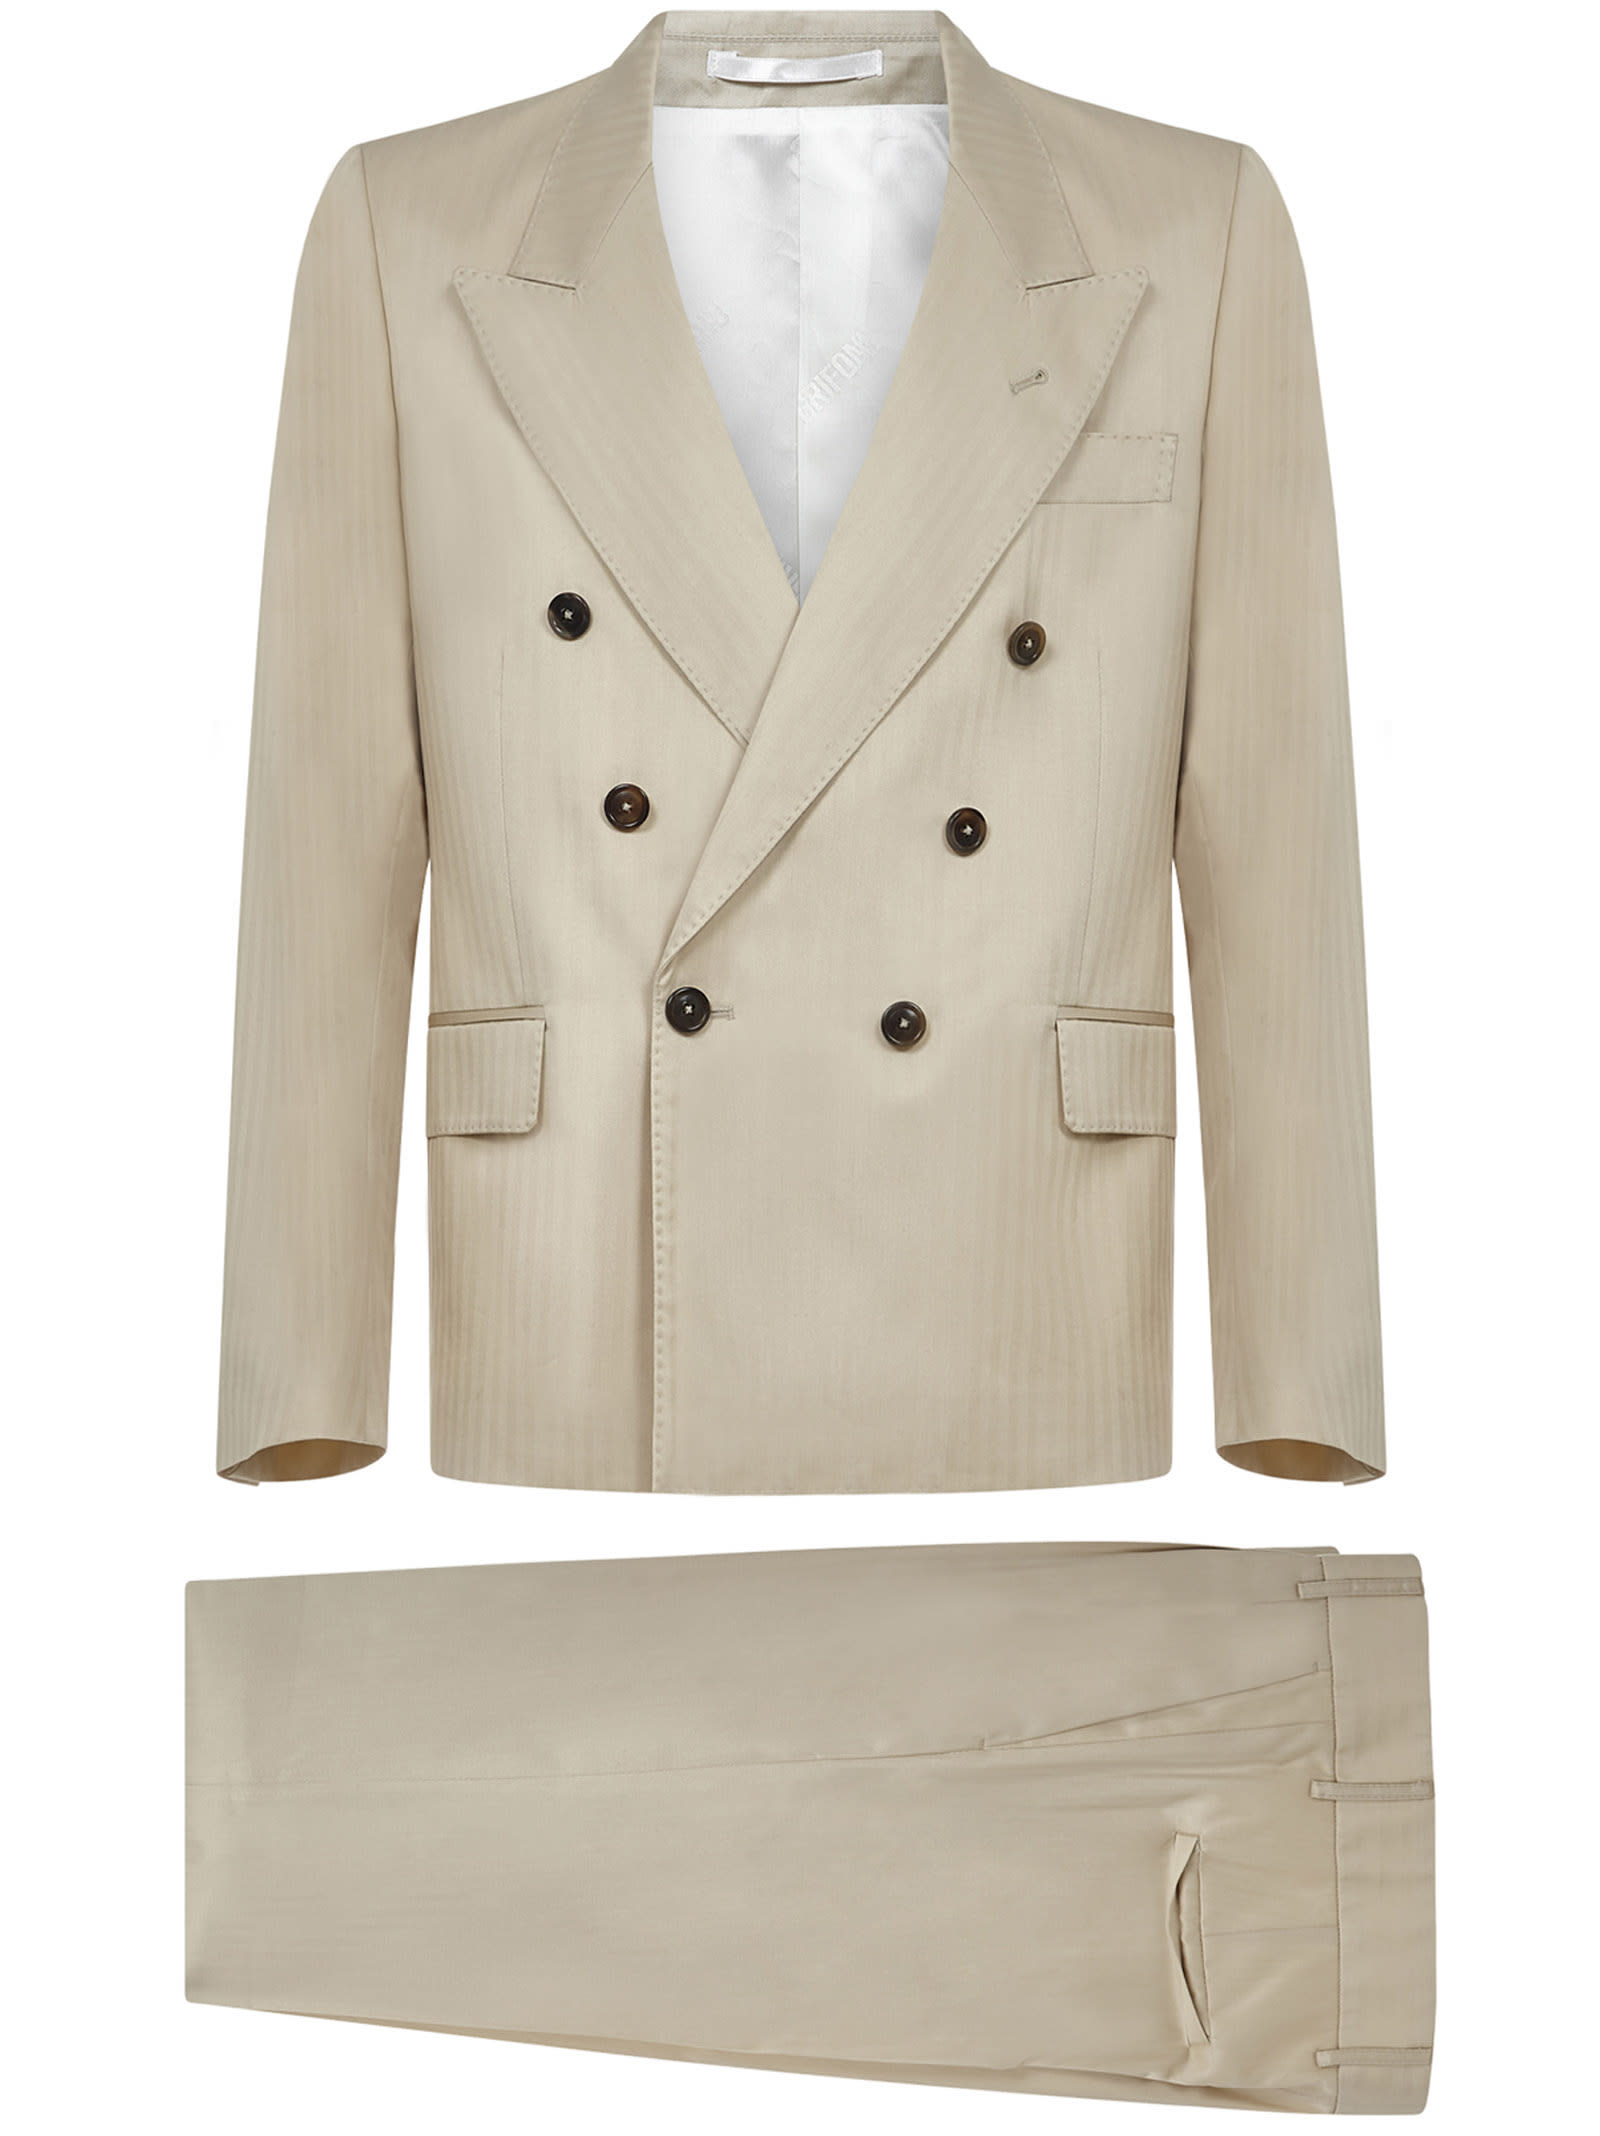 Mauro Grifoni Grifoni Suit In Sand